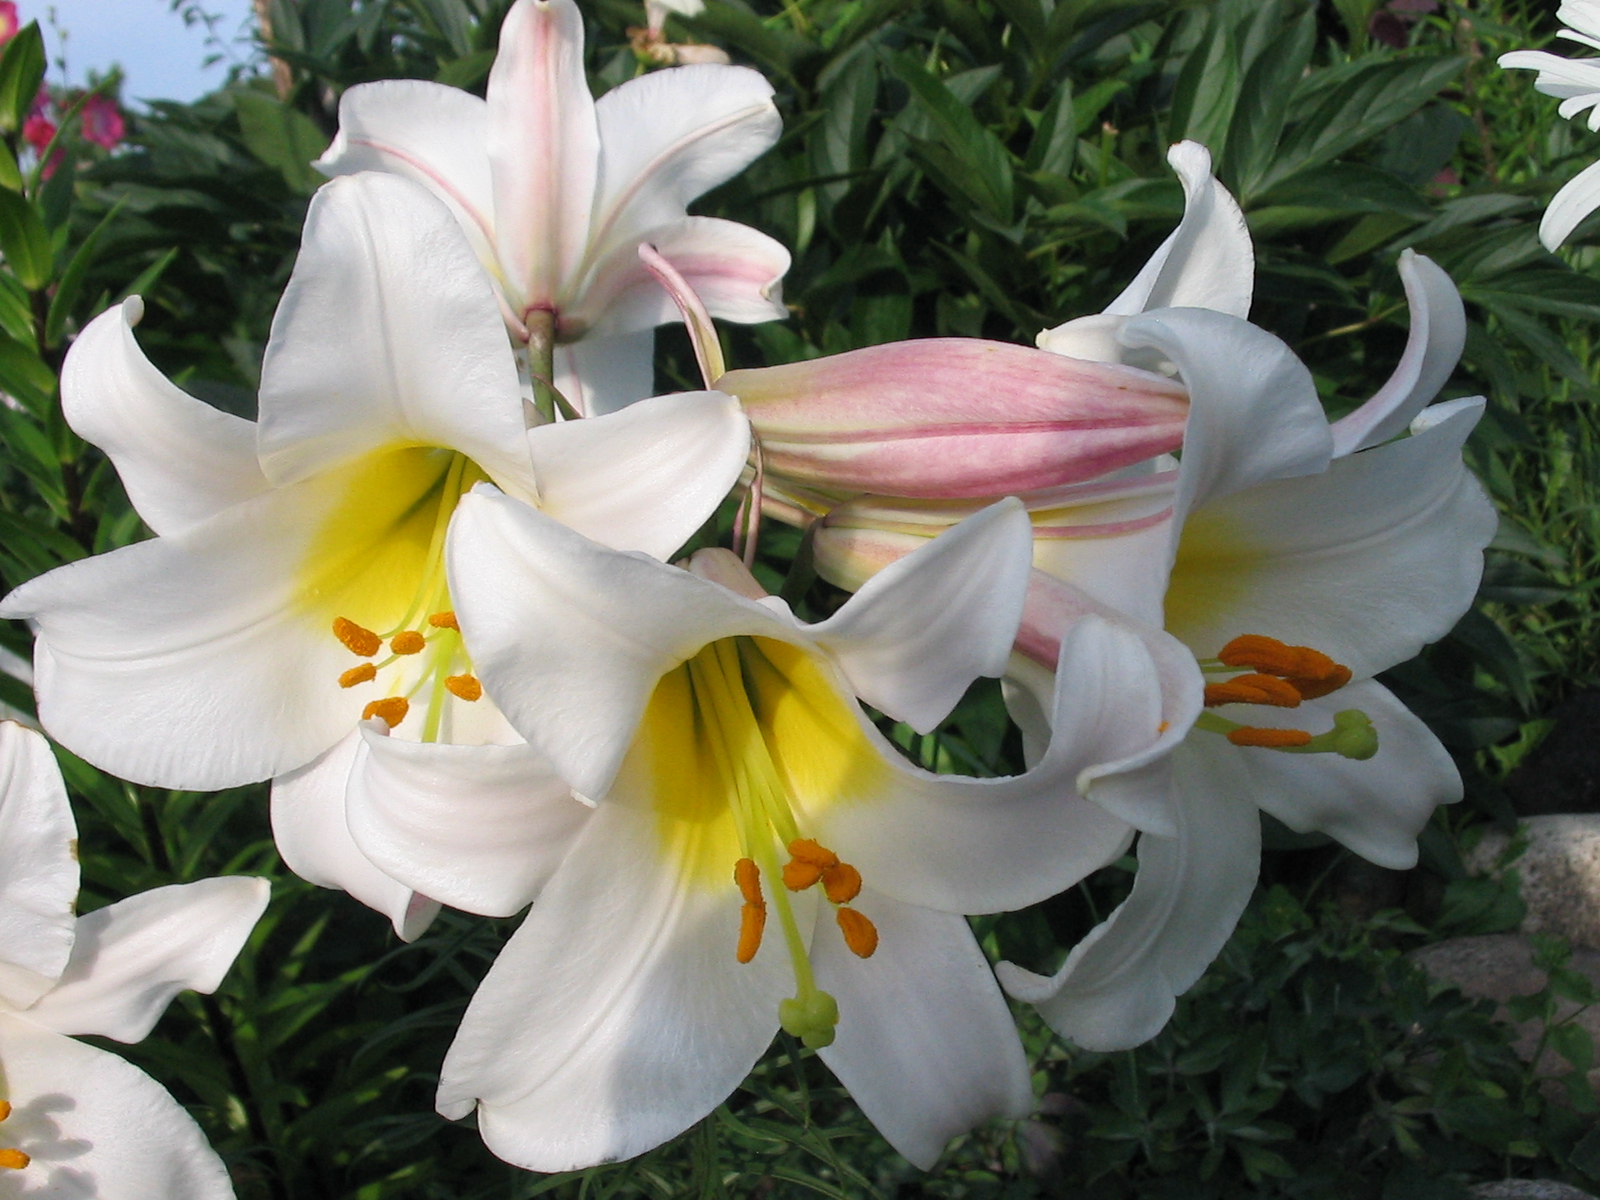 File:White lily.jpg - Wikimedia Commons